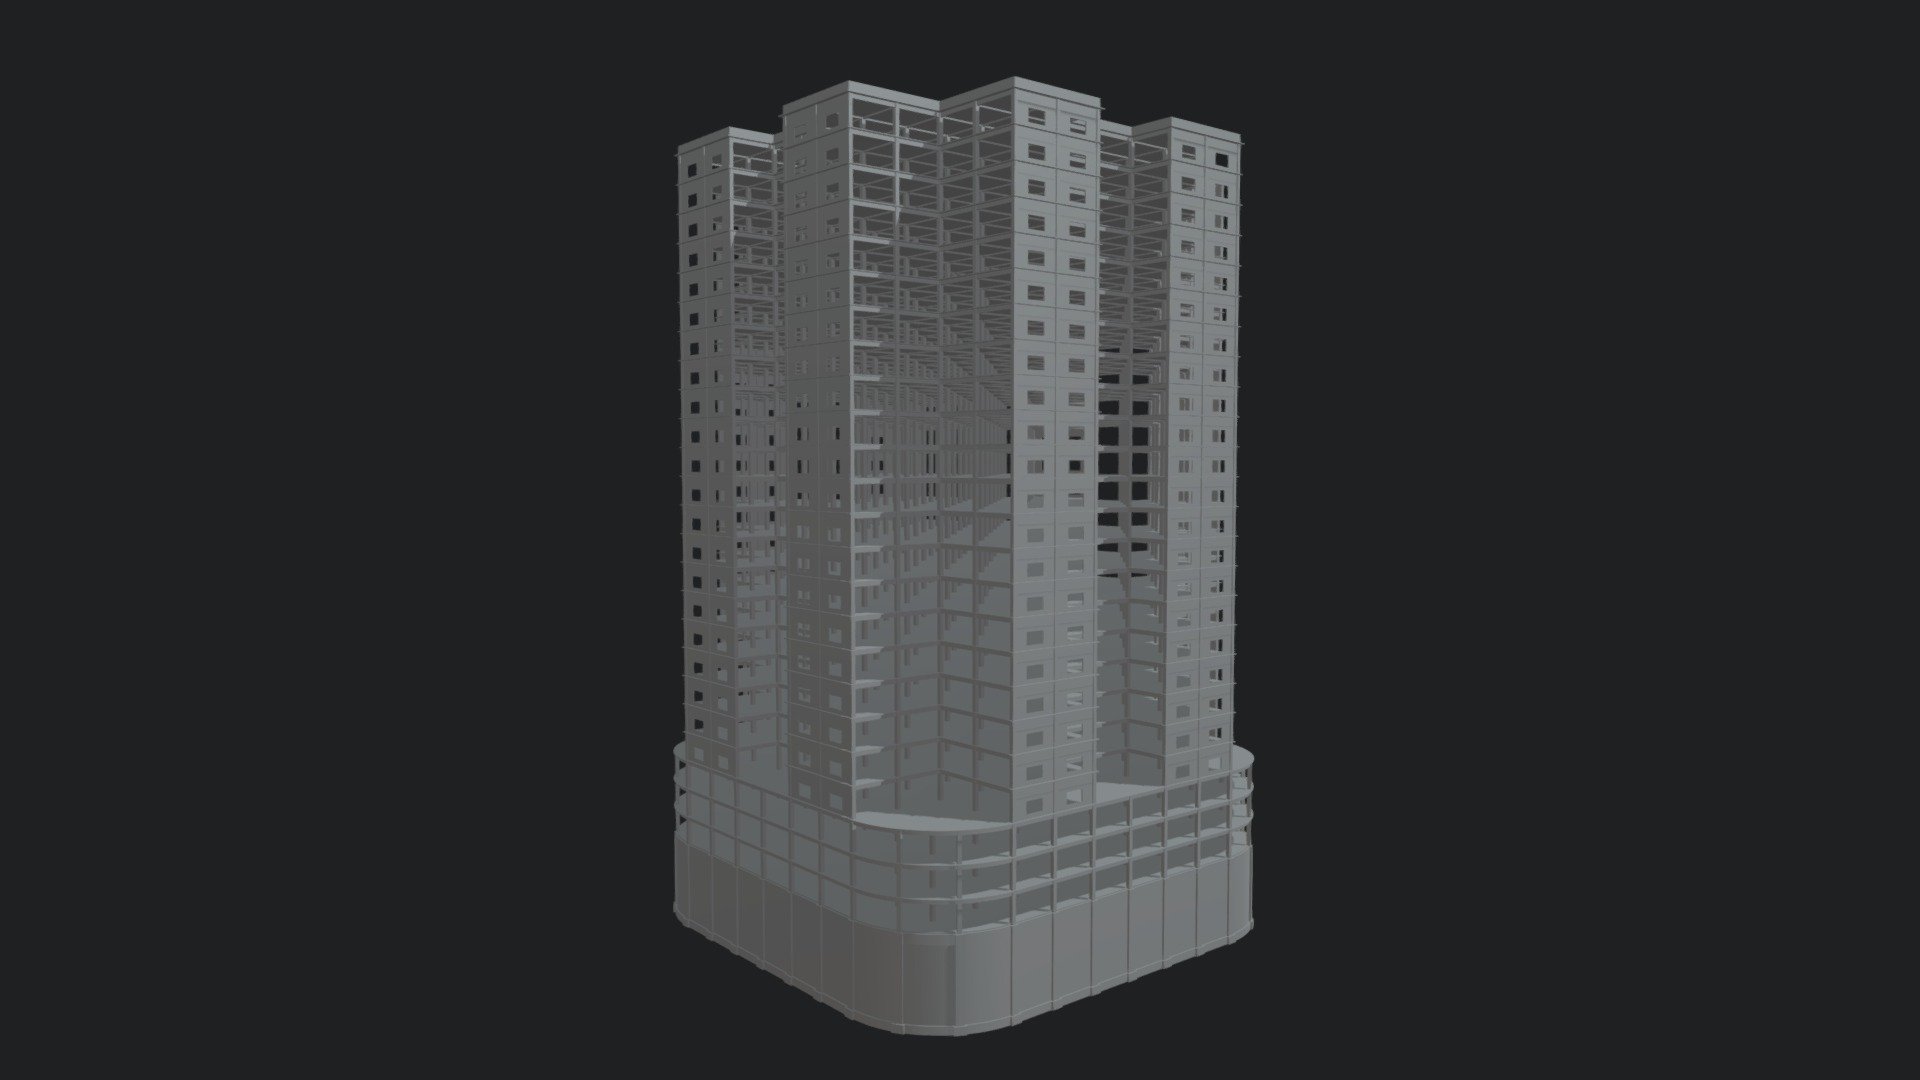 || Structural Framework  SF010
Showcasing My 10th Structural Framework Model.
&ndash;
Presenting the BIM Model in 3D Environment
Structural Notes:
1) 22 - Floors Elevation Structure
2) 3 - Parking Floors
3) Rooftop Open
4) Concrete Material Applied
5) Columns
6) Beams
7) Floors
8) Ceilings
9) Walls

&ndash;
Presenting the BIM Model in three respective views on my CGSociety Profile:
https://amirbaloch.cgsociety.org
&ndash;
General Note:
This is just a concept Structural design and should not be modelled without my permission. Do not use for construction or commercial purpose.
©2020 AMIRBALOCH. All Rights Reserved 3d model